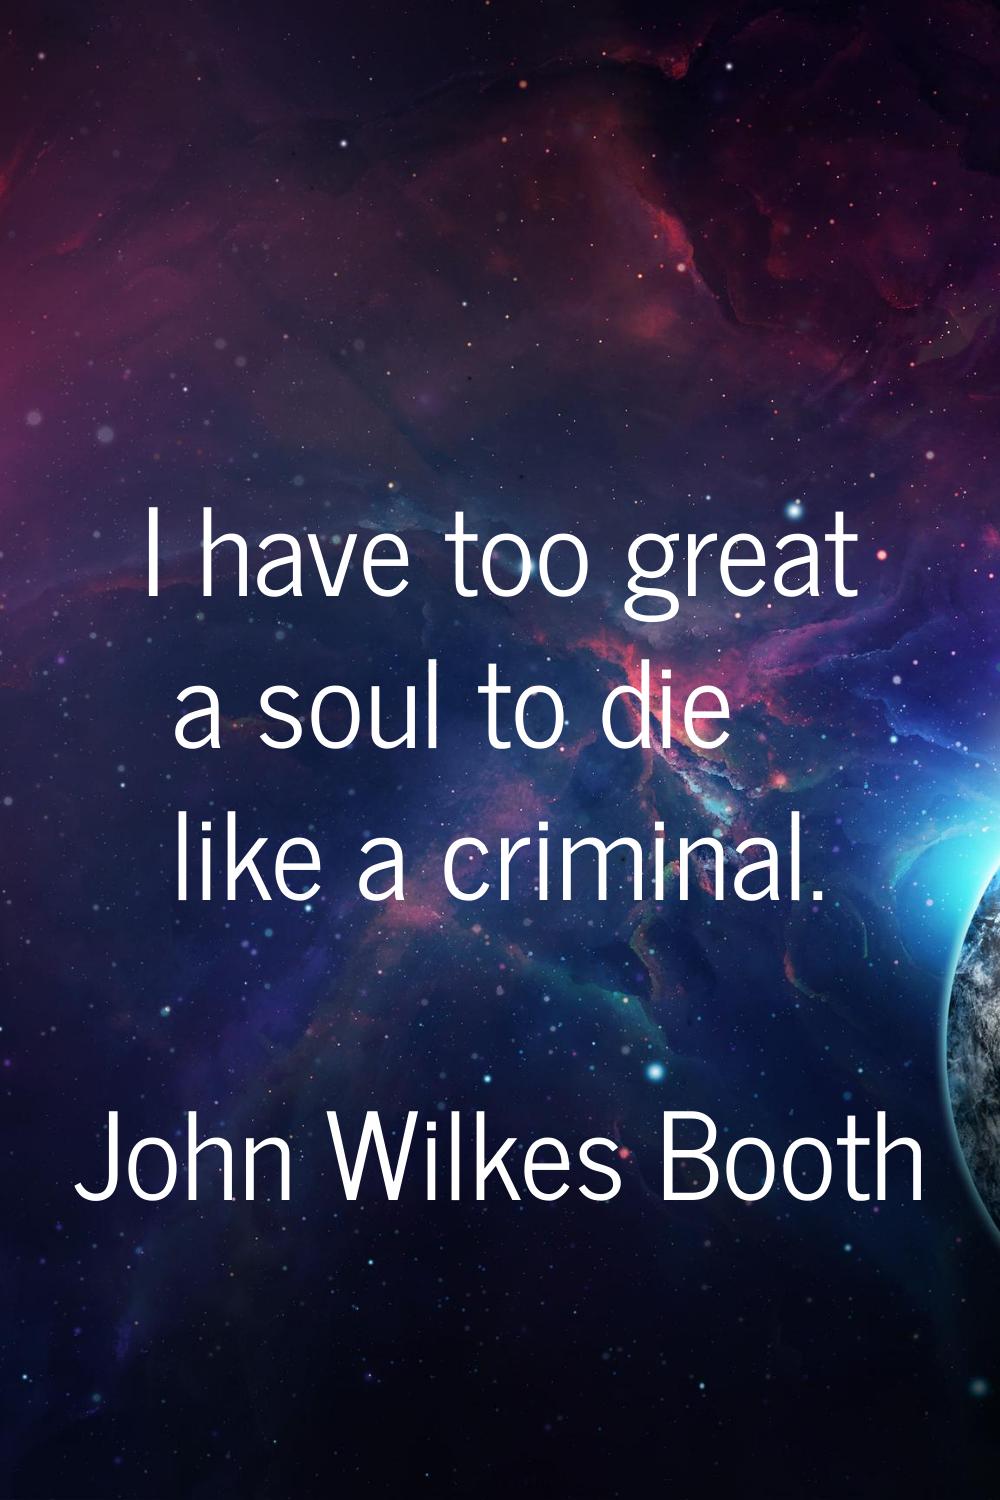 I have too great a soul to die like a criminal.